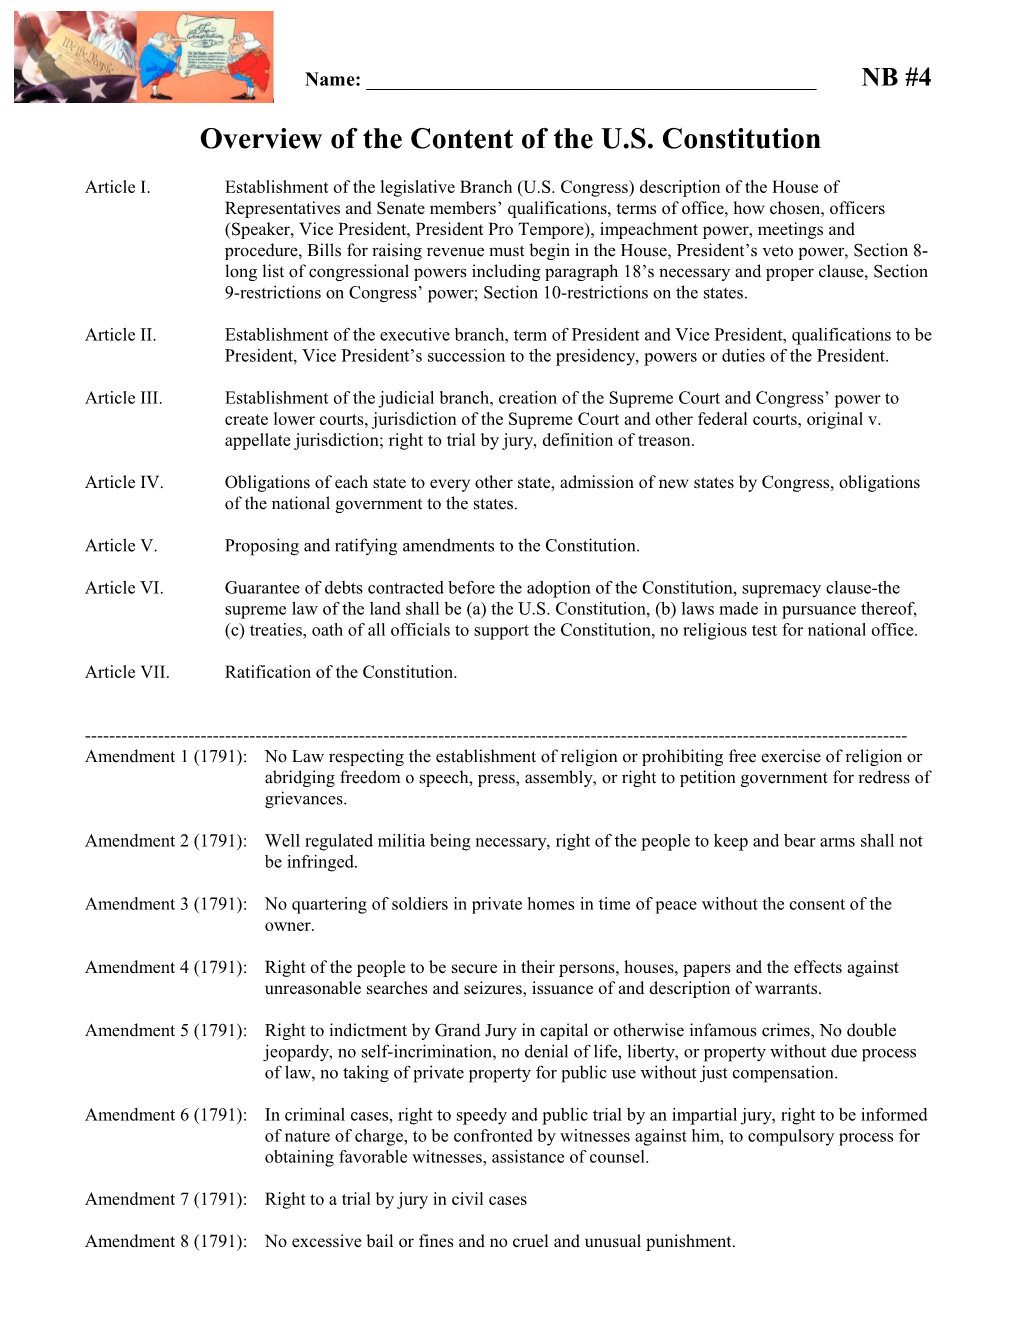 Overview of the Content of the U.S. Constitution